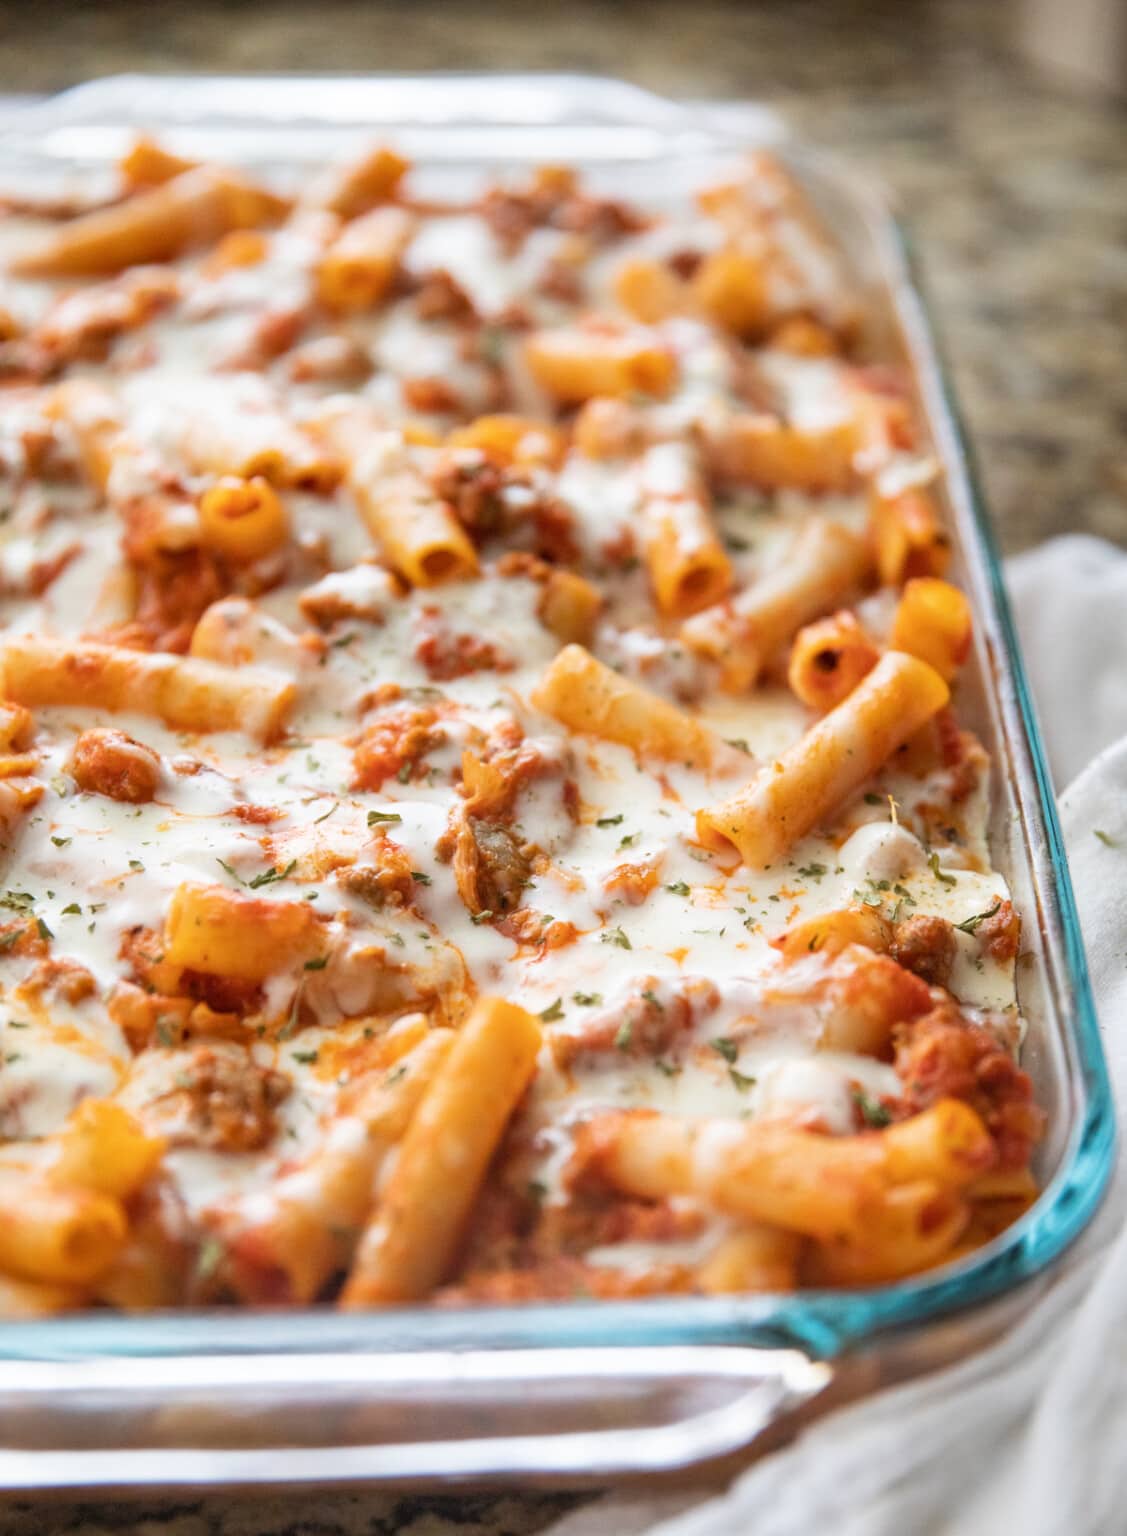 How to make: Baked provencal ziti provolone